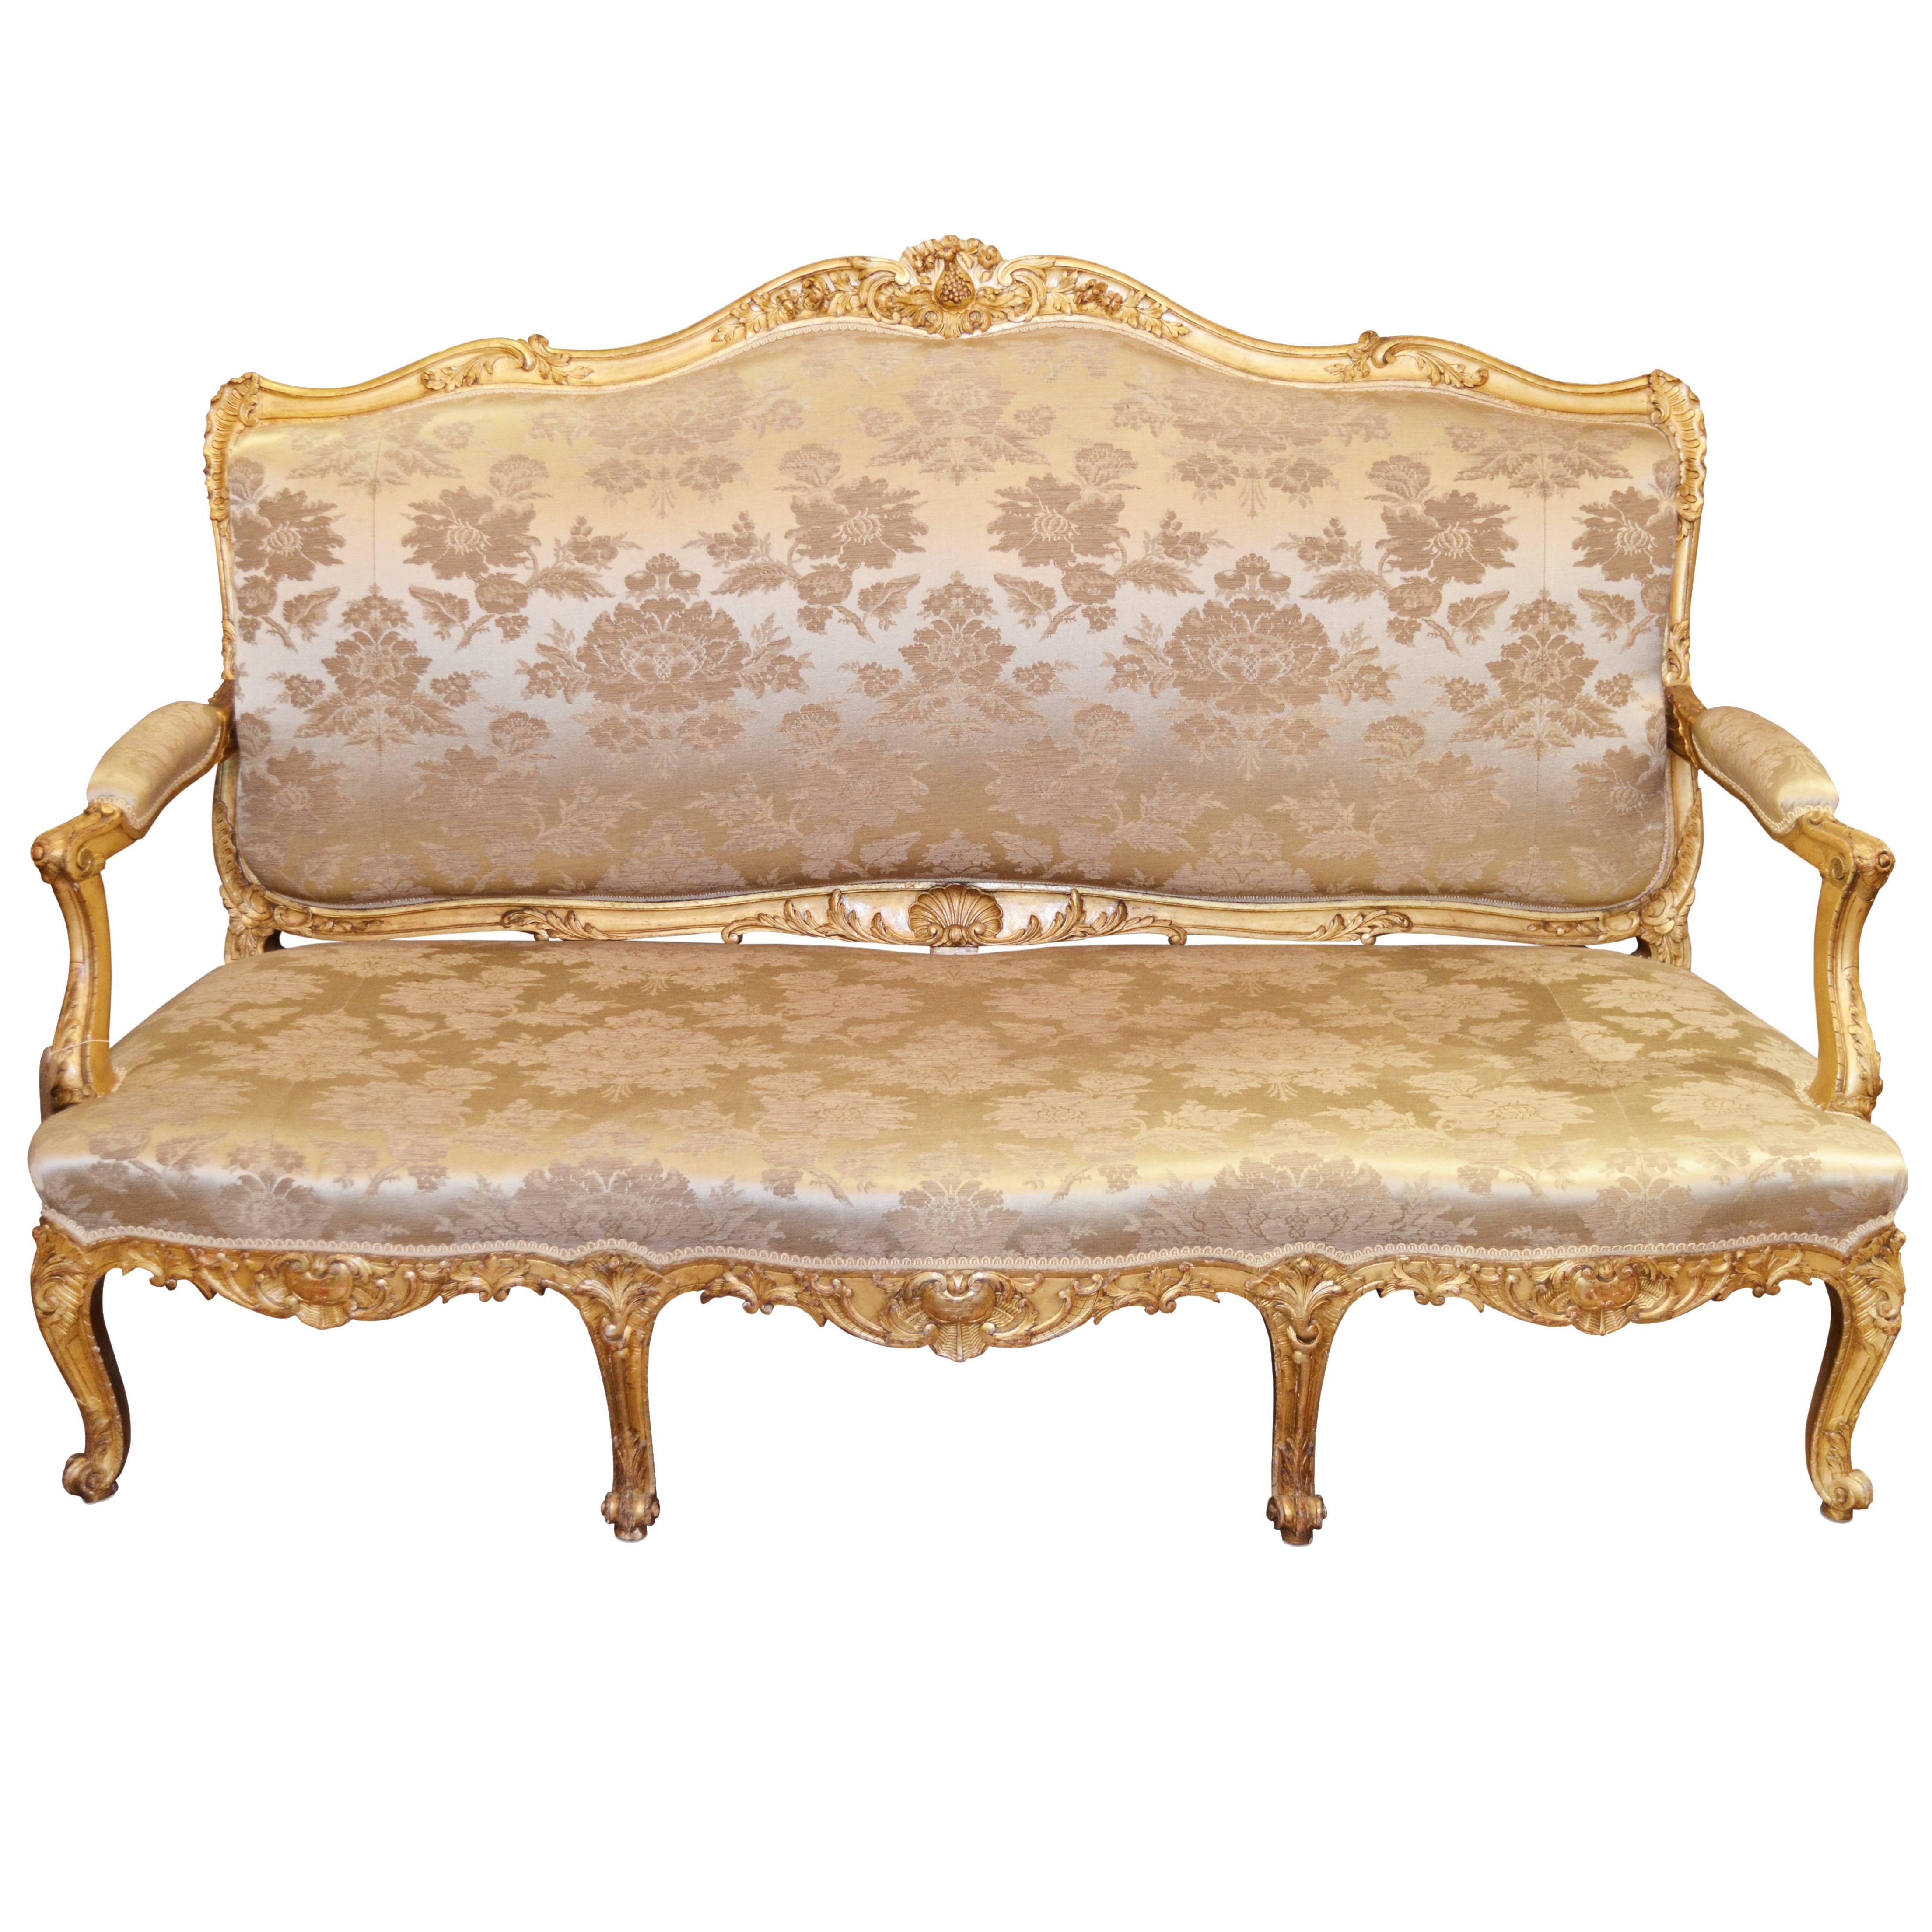 19th Century French Louis XV Style Upholstered Giltwood Sofa